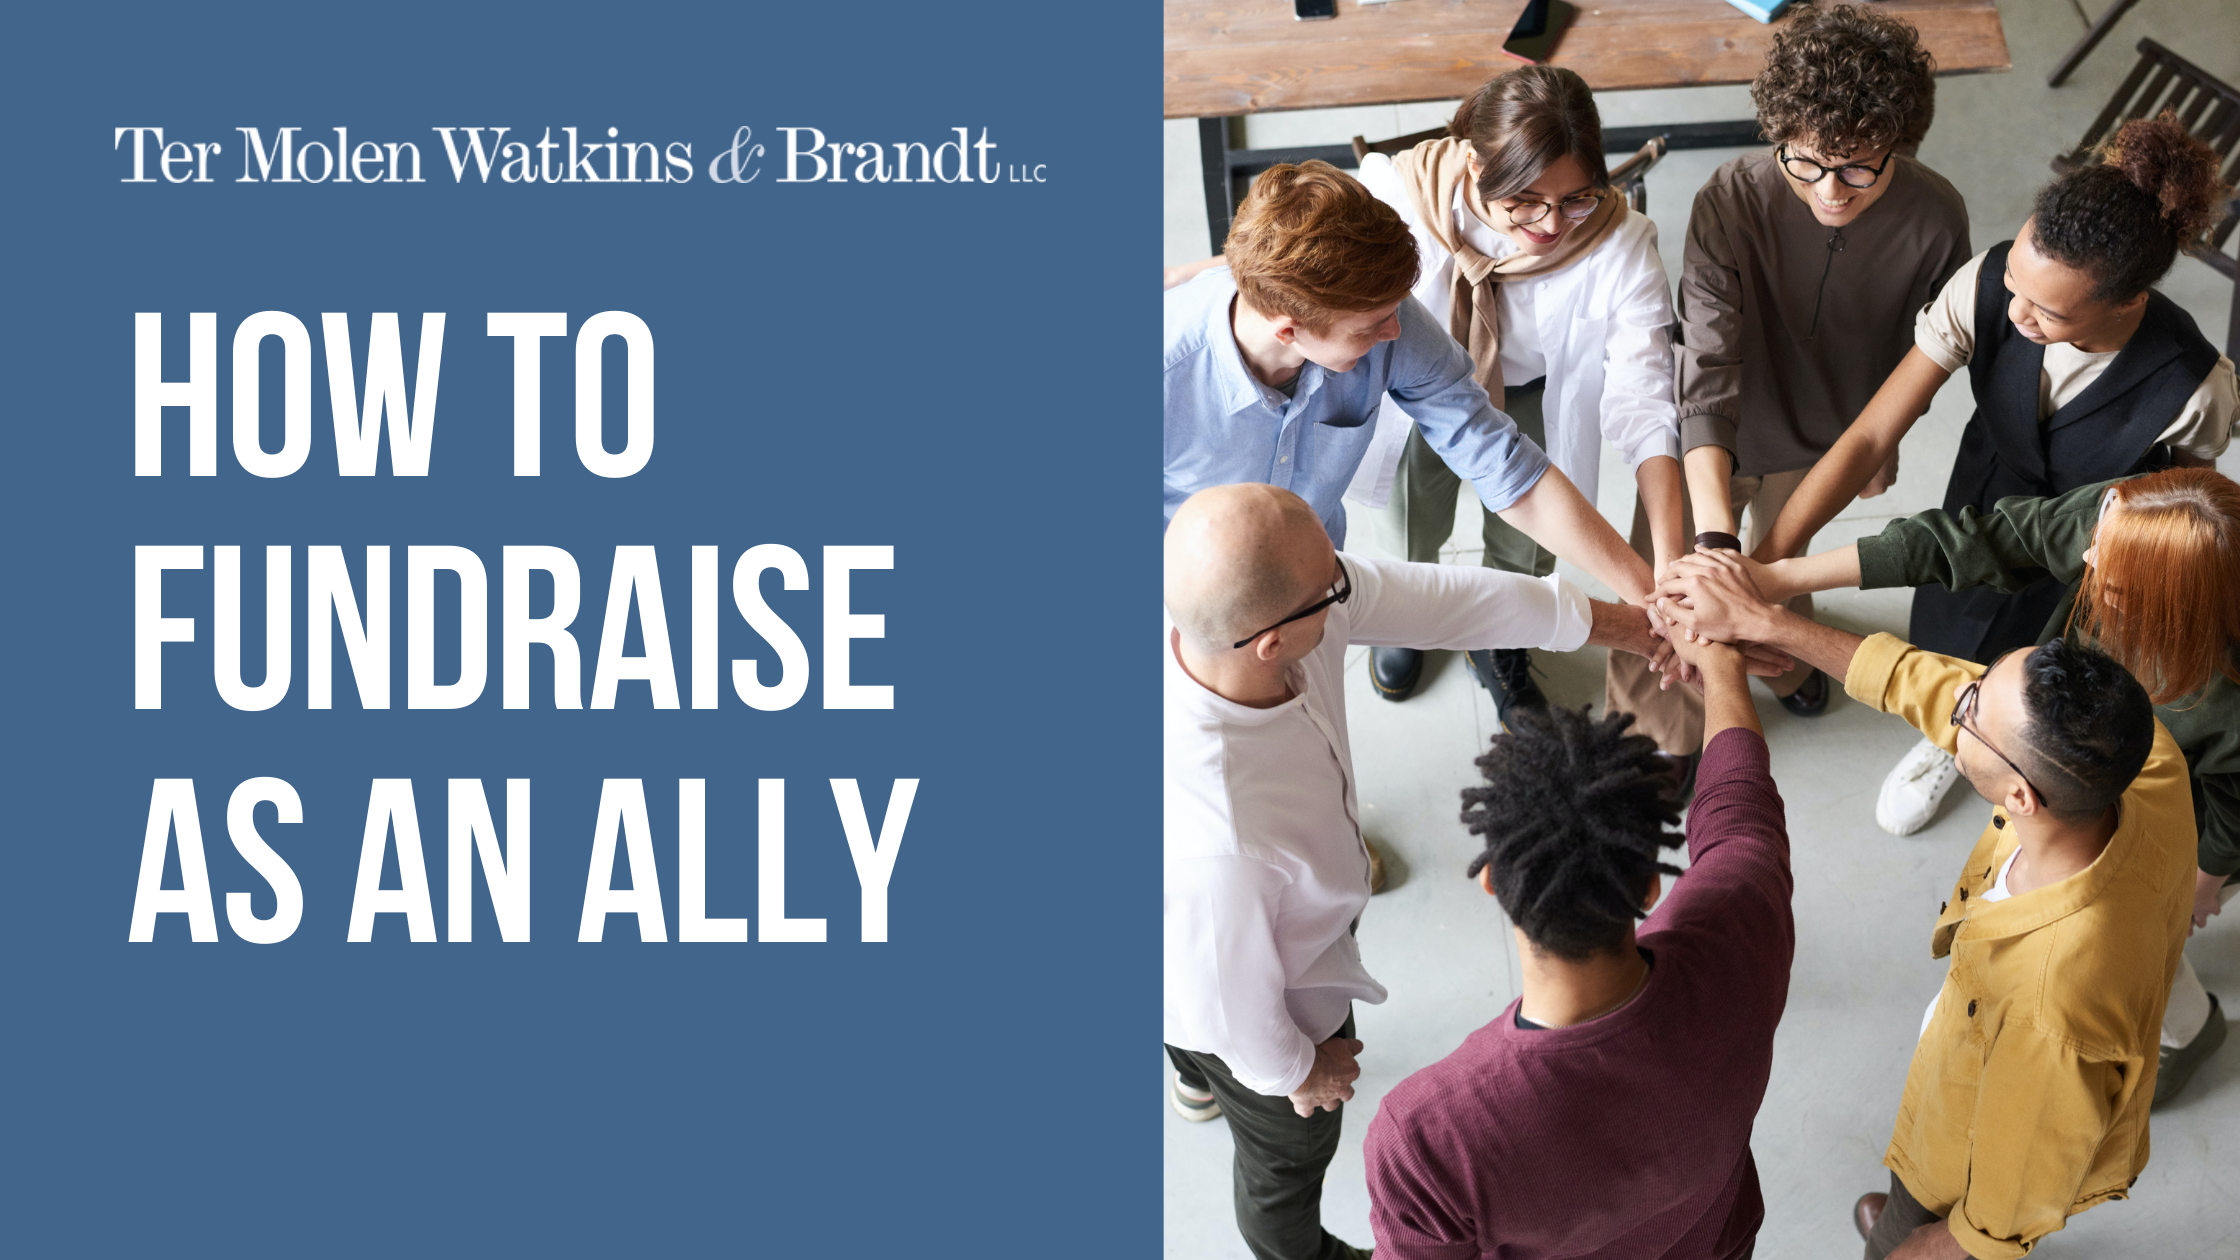 How to Fundraise as an Ally